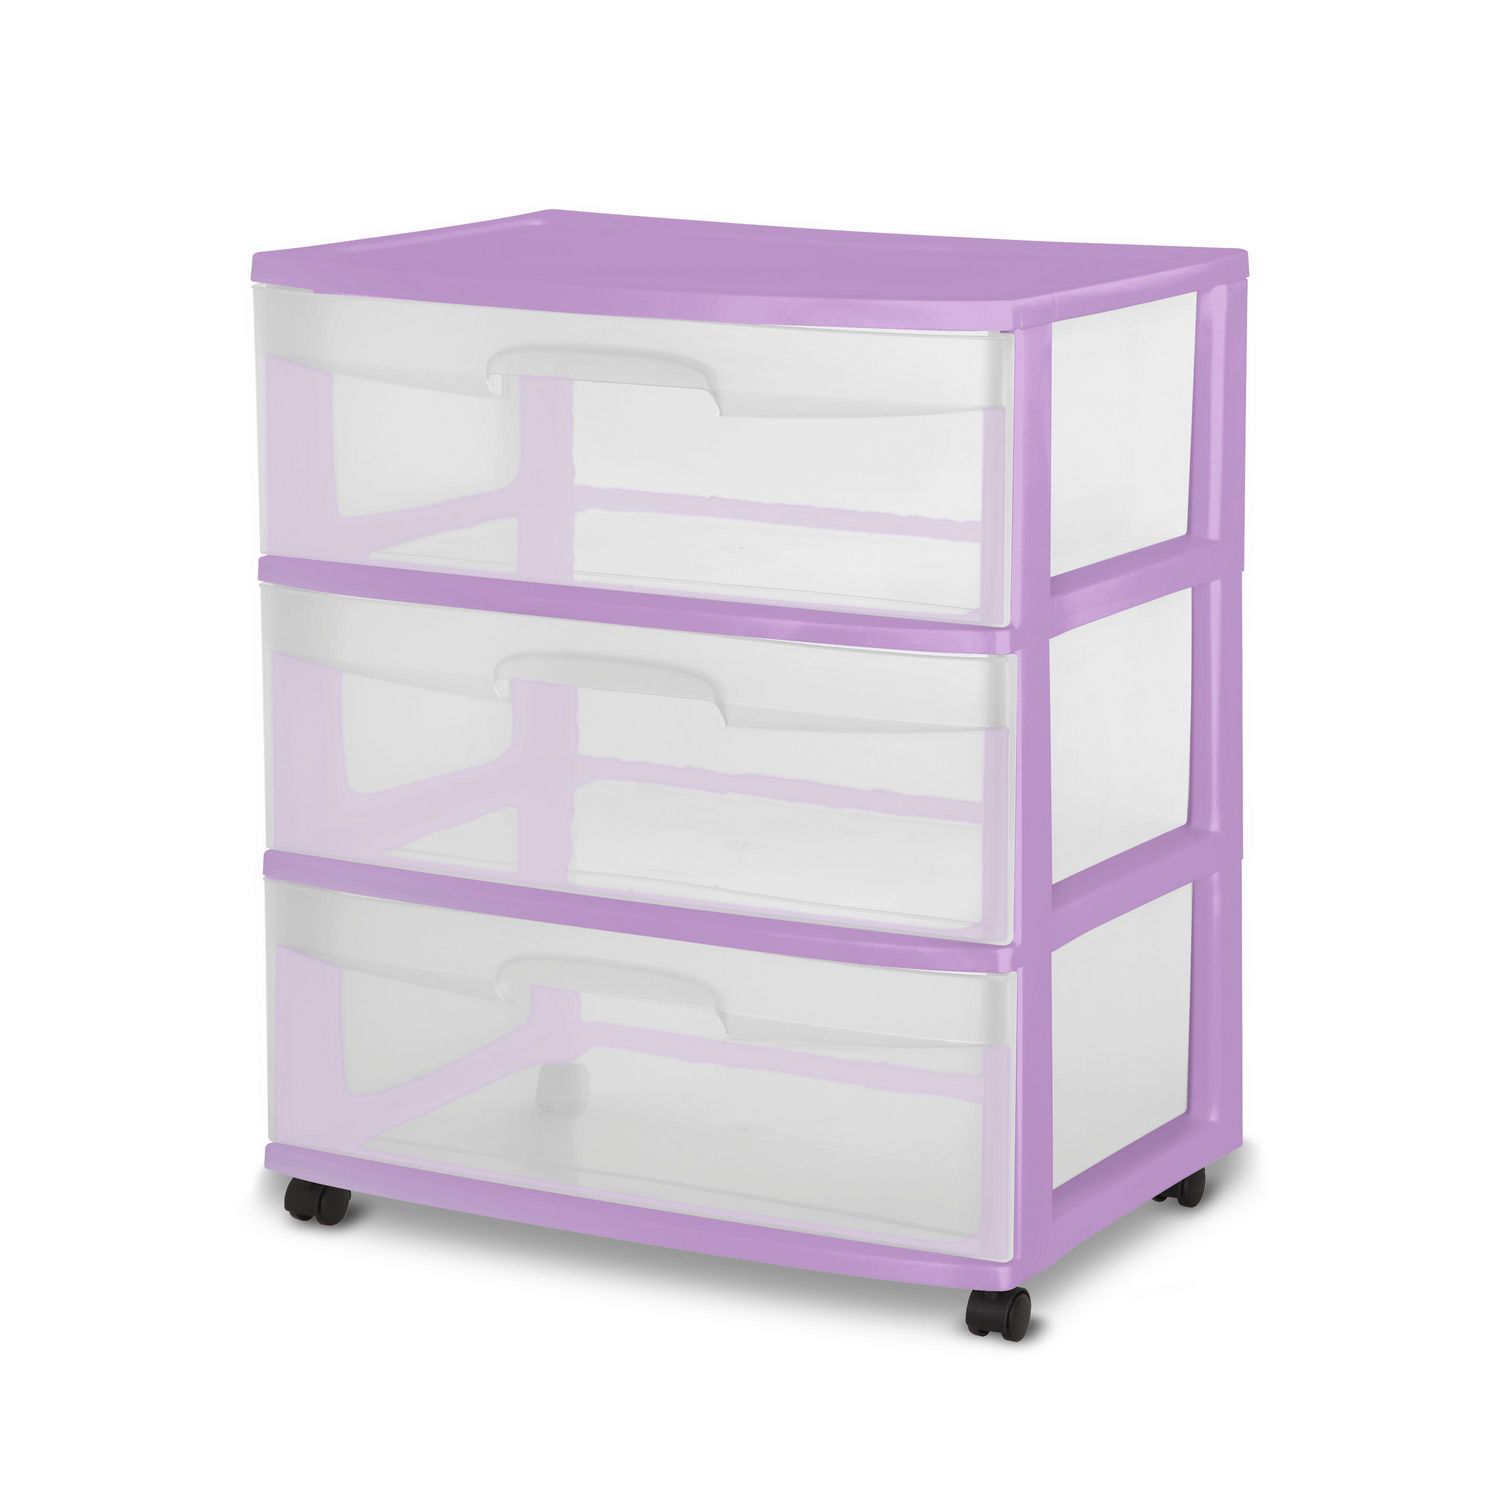 PURPLE is coming to the U.S. General 5 Drawer 30” Mechanics Cart next year.  Stay tuned as we unveil more new products all week long fro